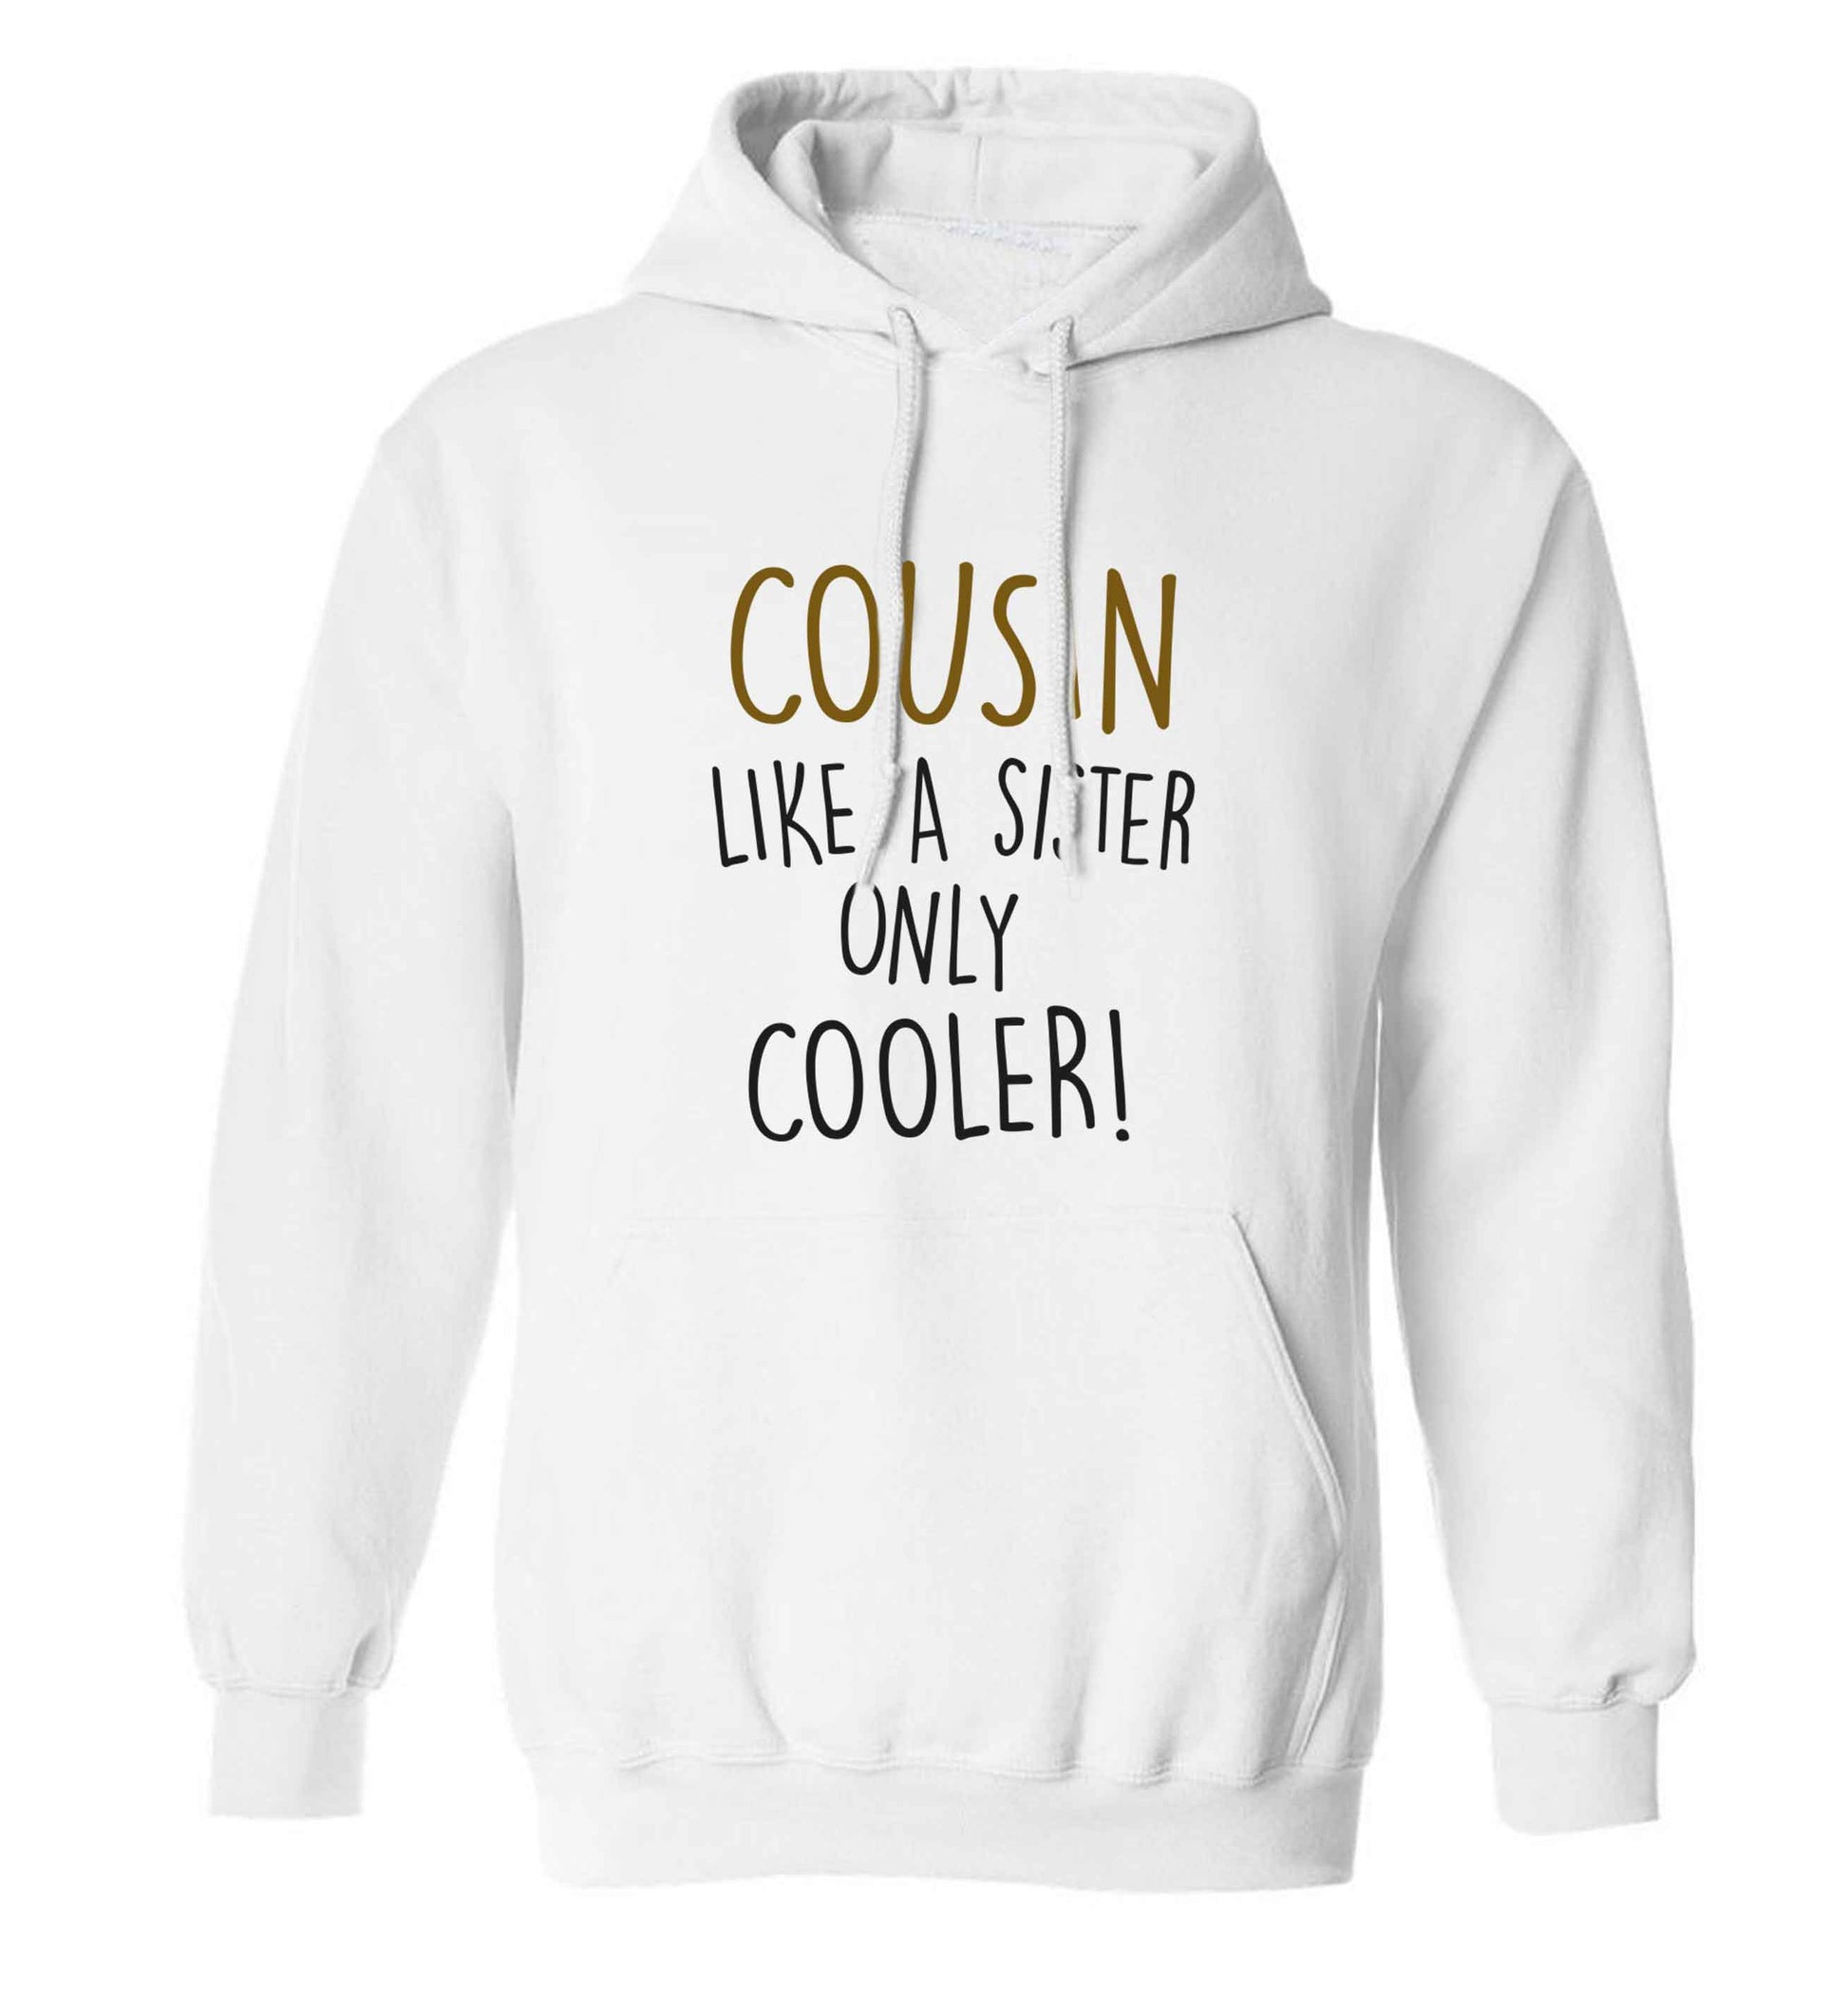 Cousin like a sister only cooler adults unisex white hoodie 2XL